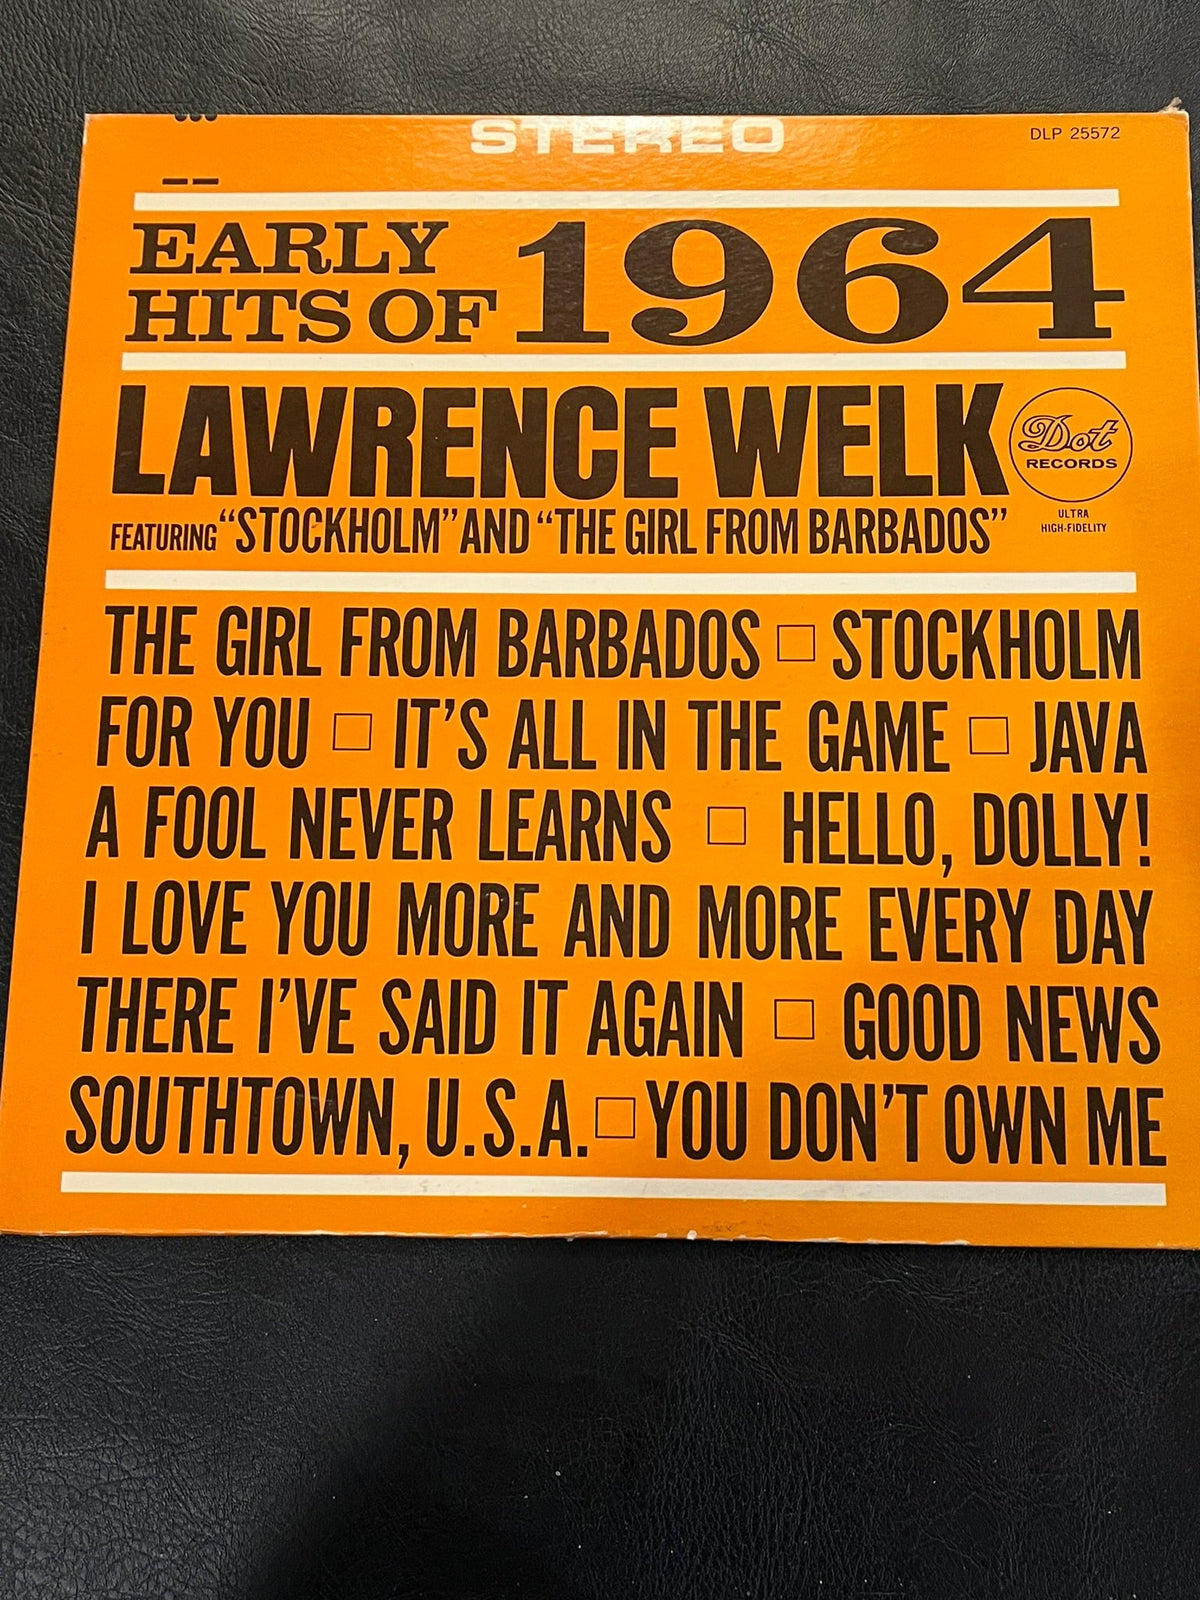 Early Hits of 1964